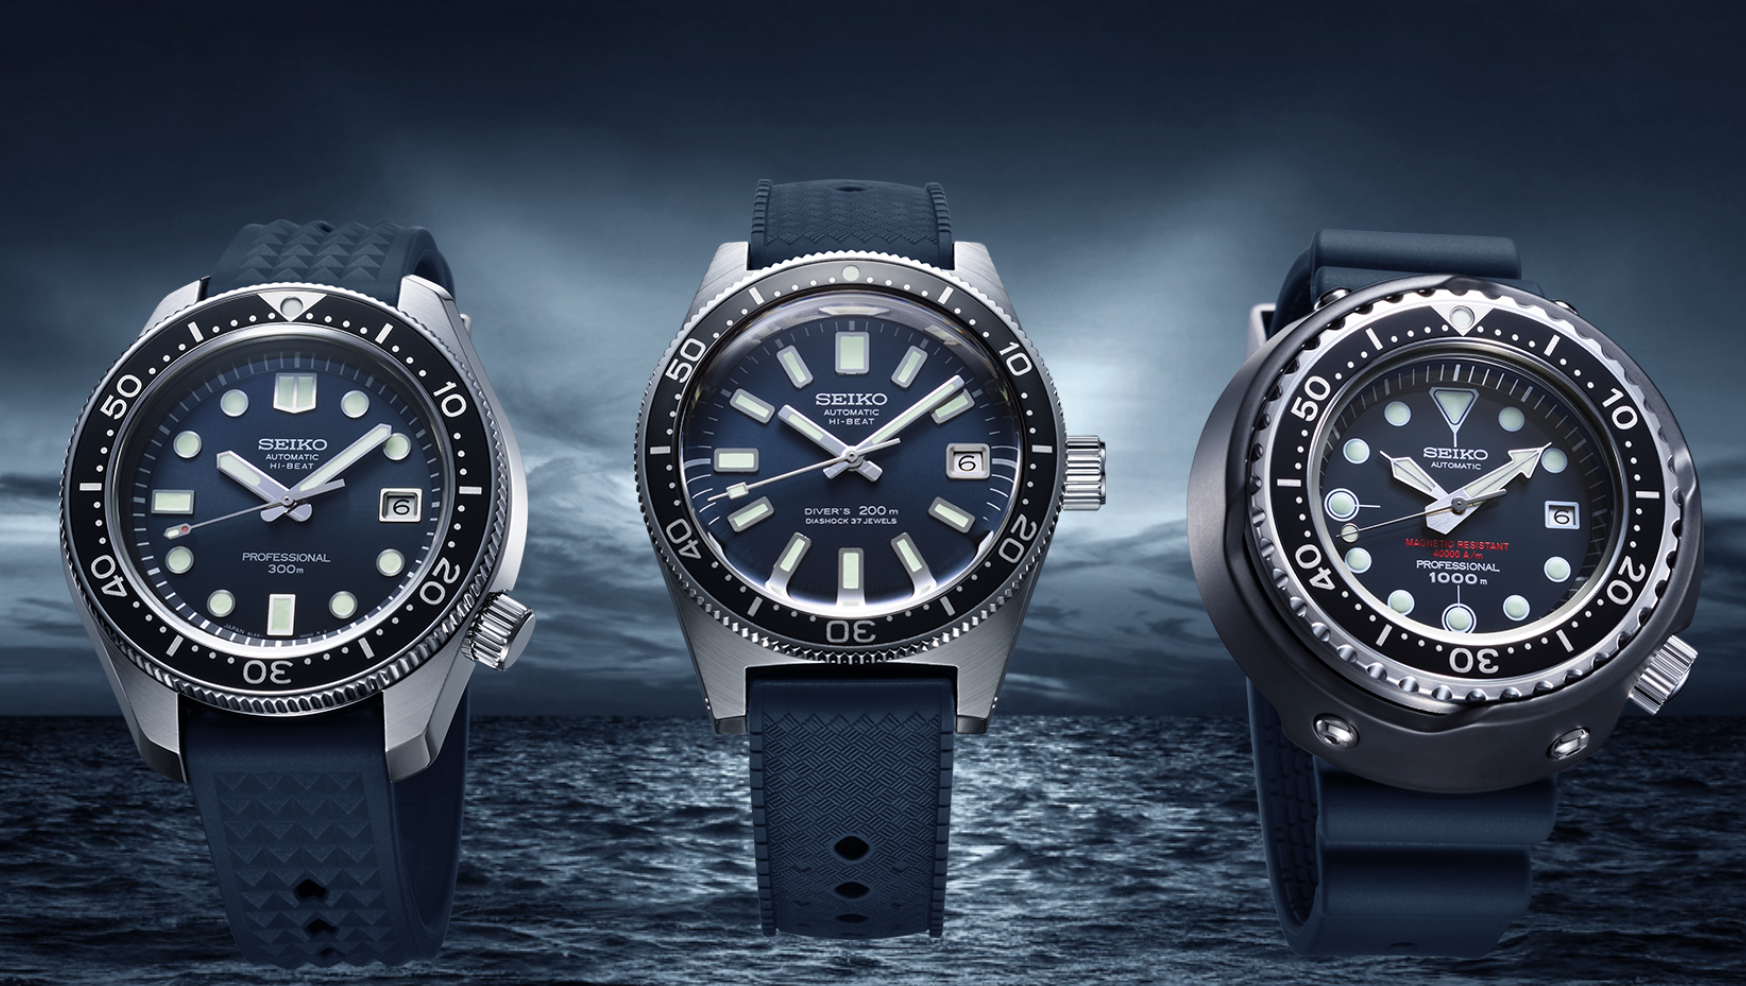 Seiko's latest dive watch trilogy pay tribute to three classics